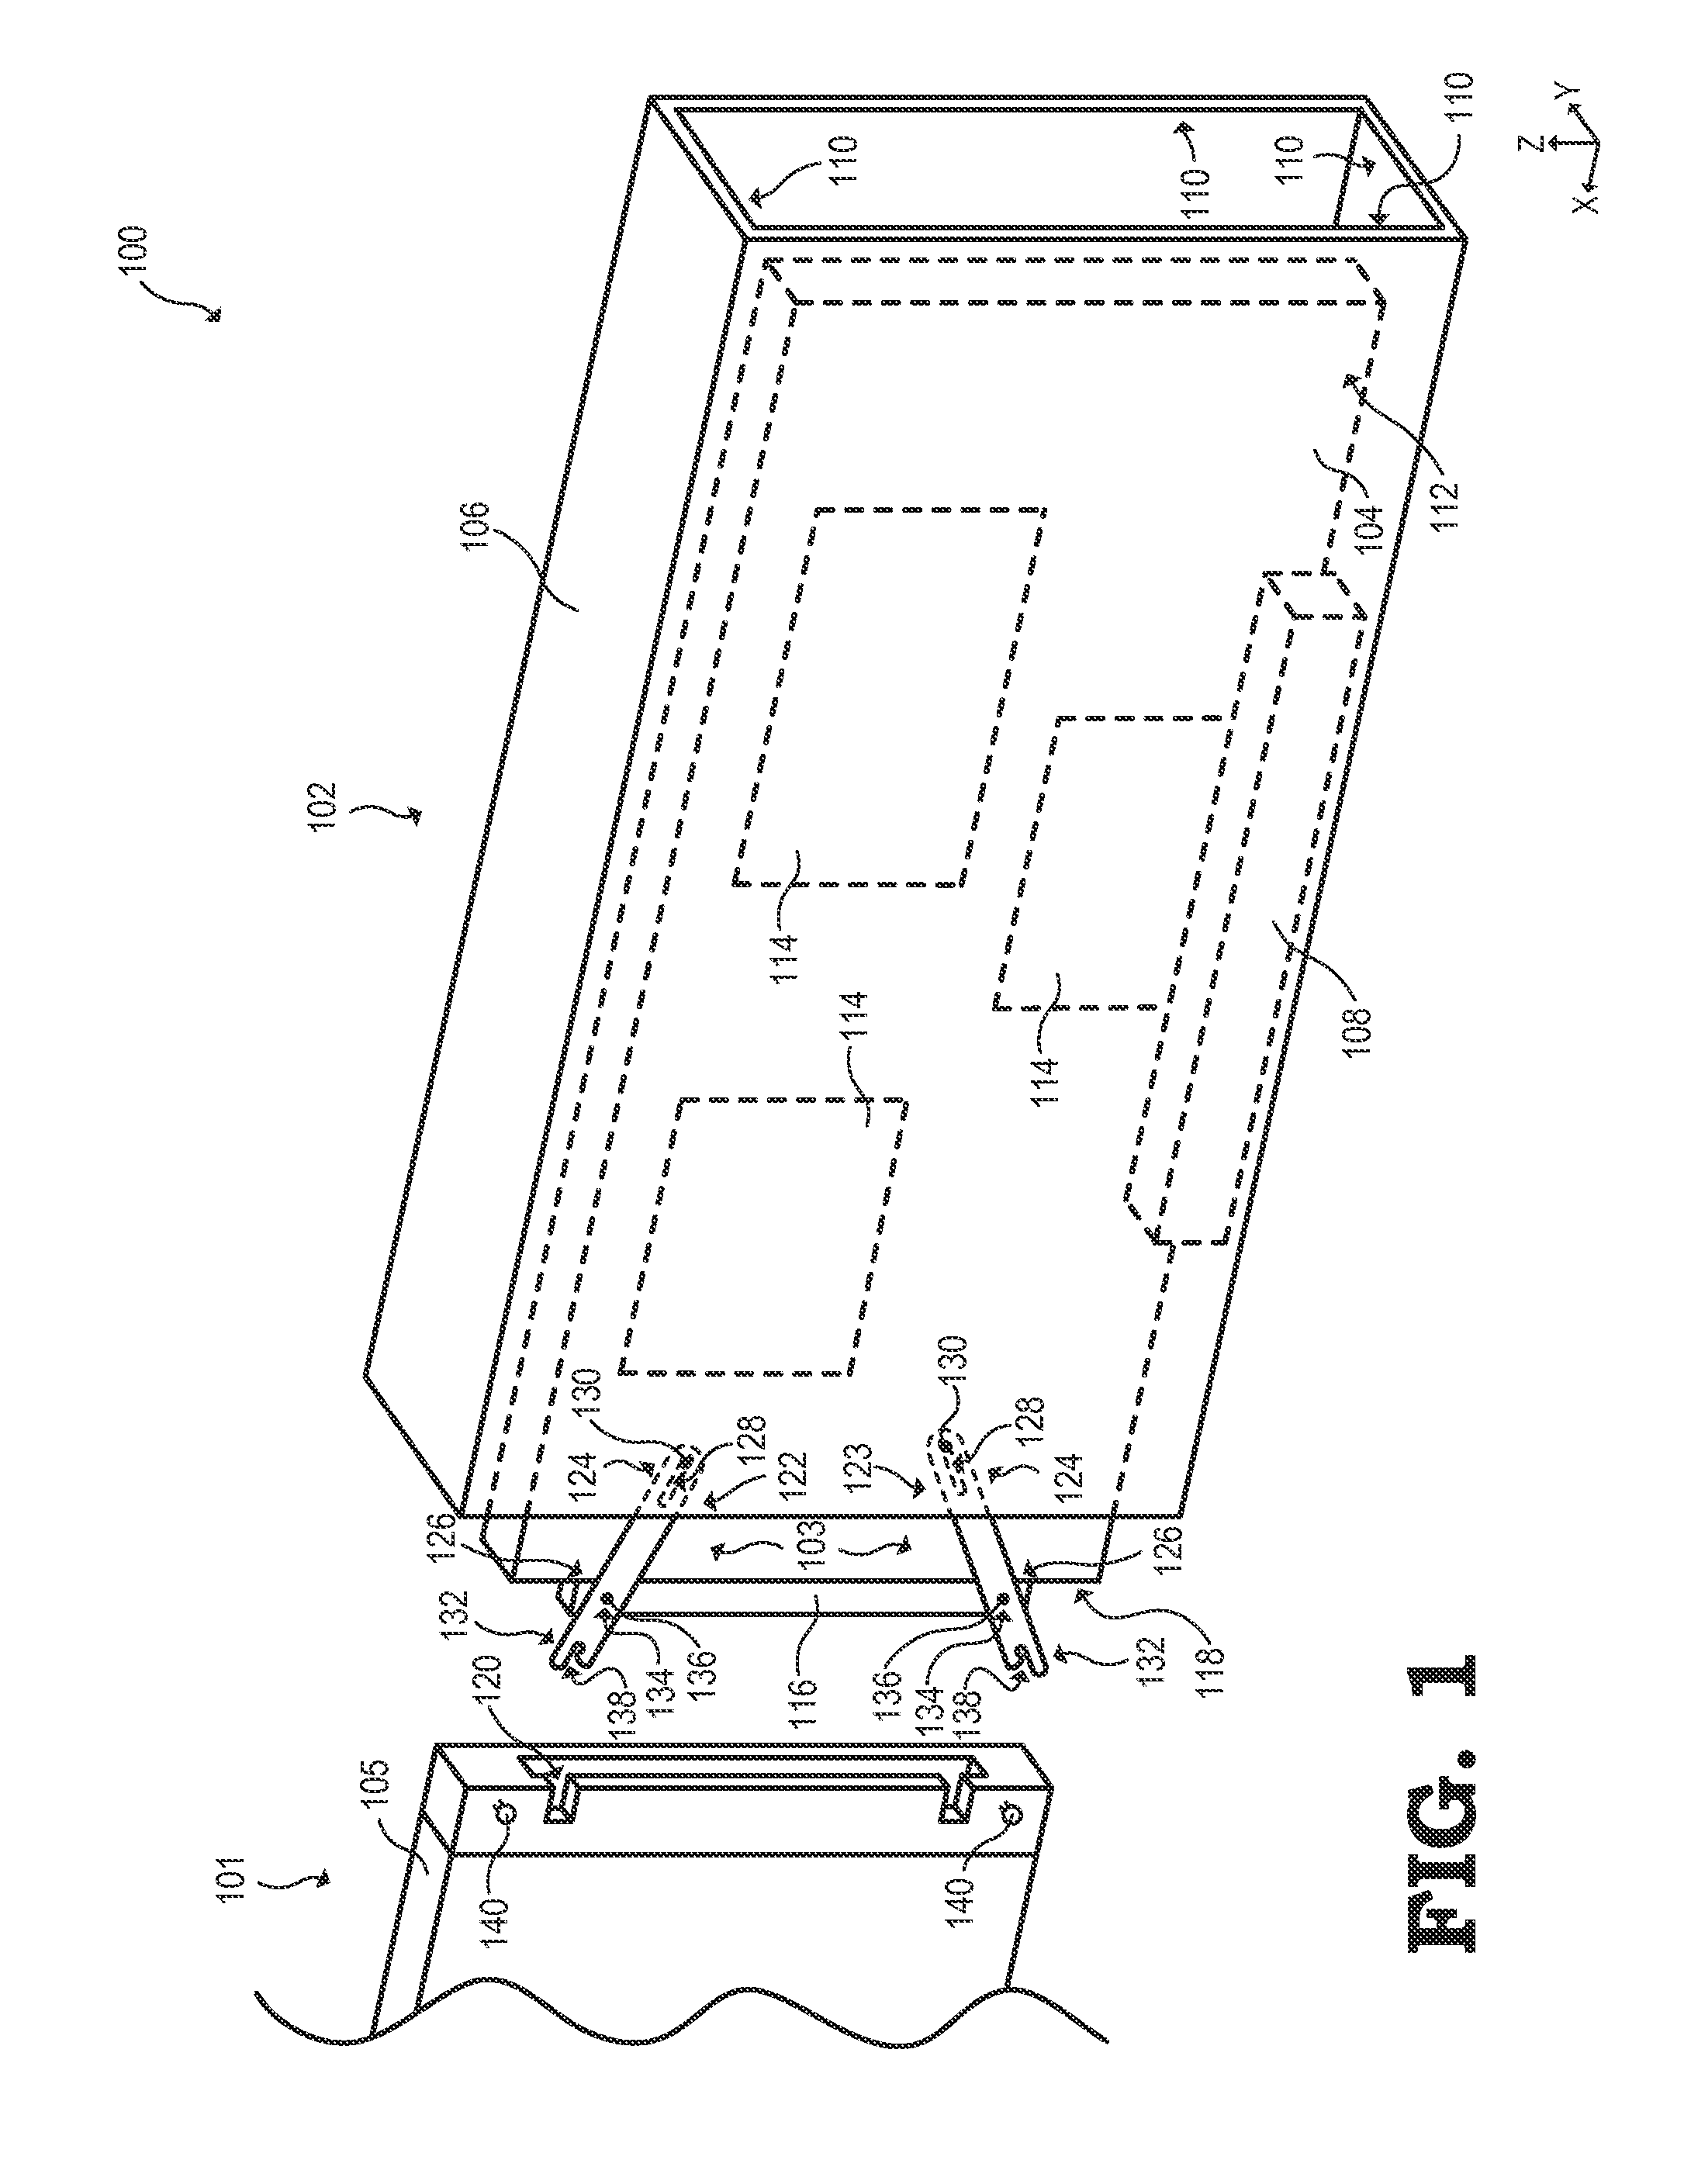 Lever mechanism to facilitate edge coupling of circuit board